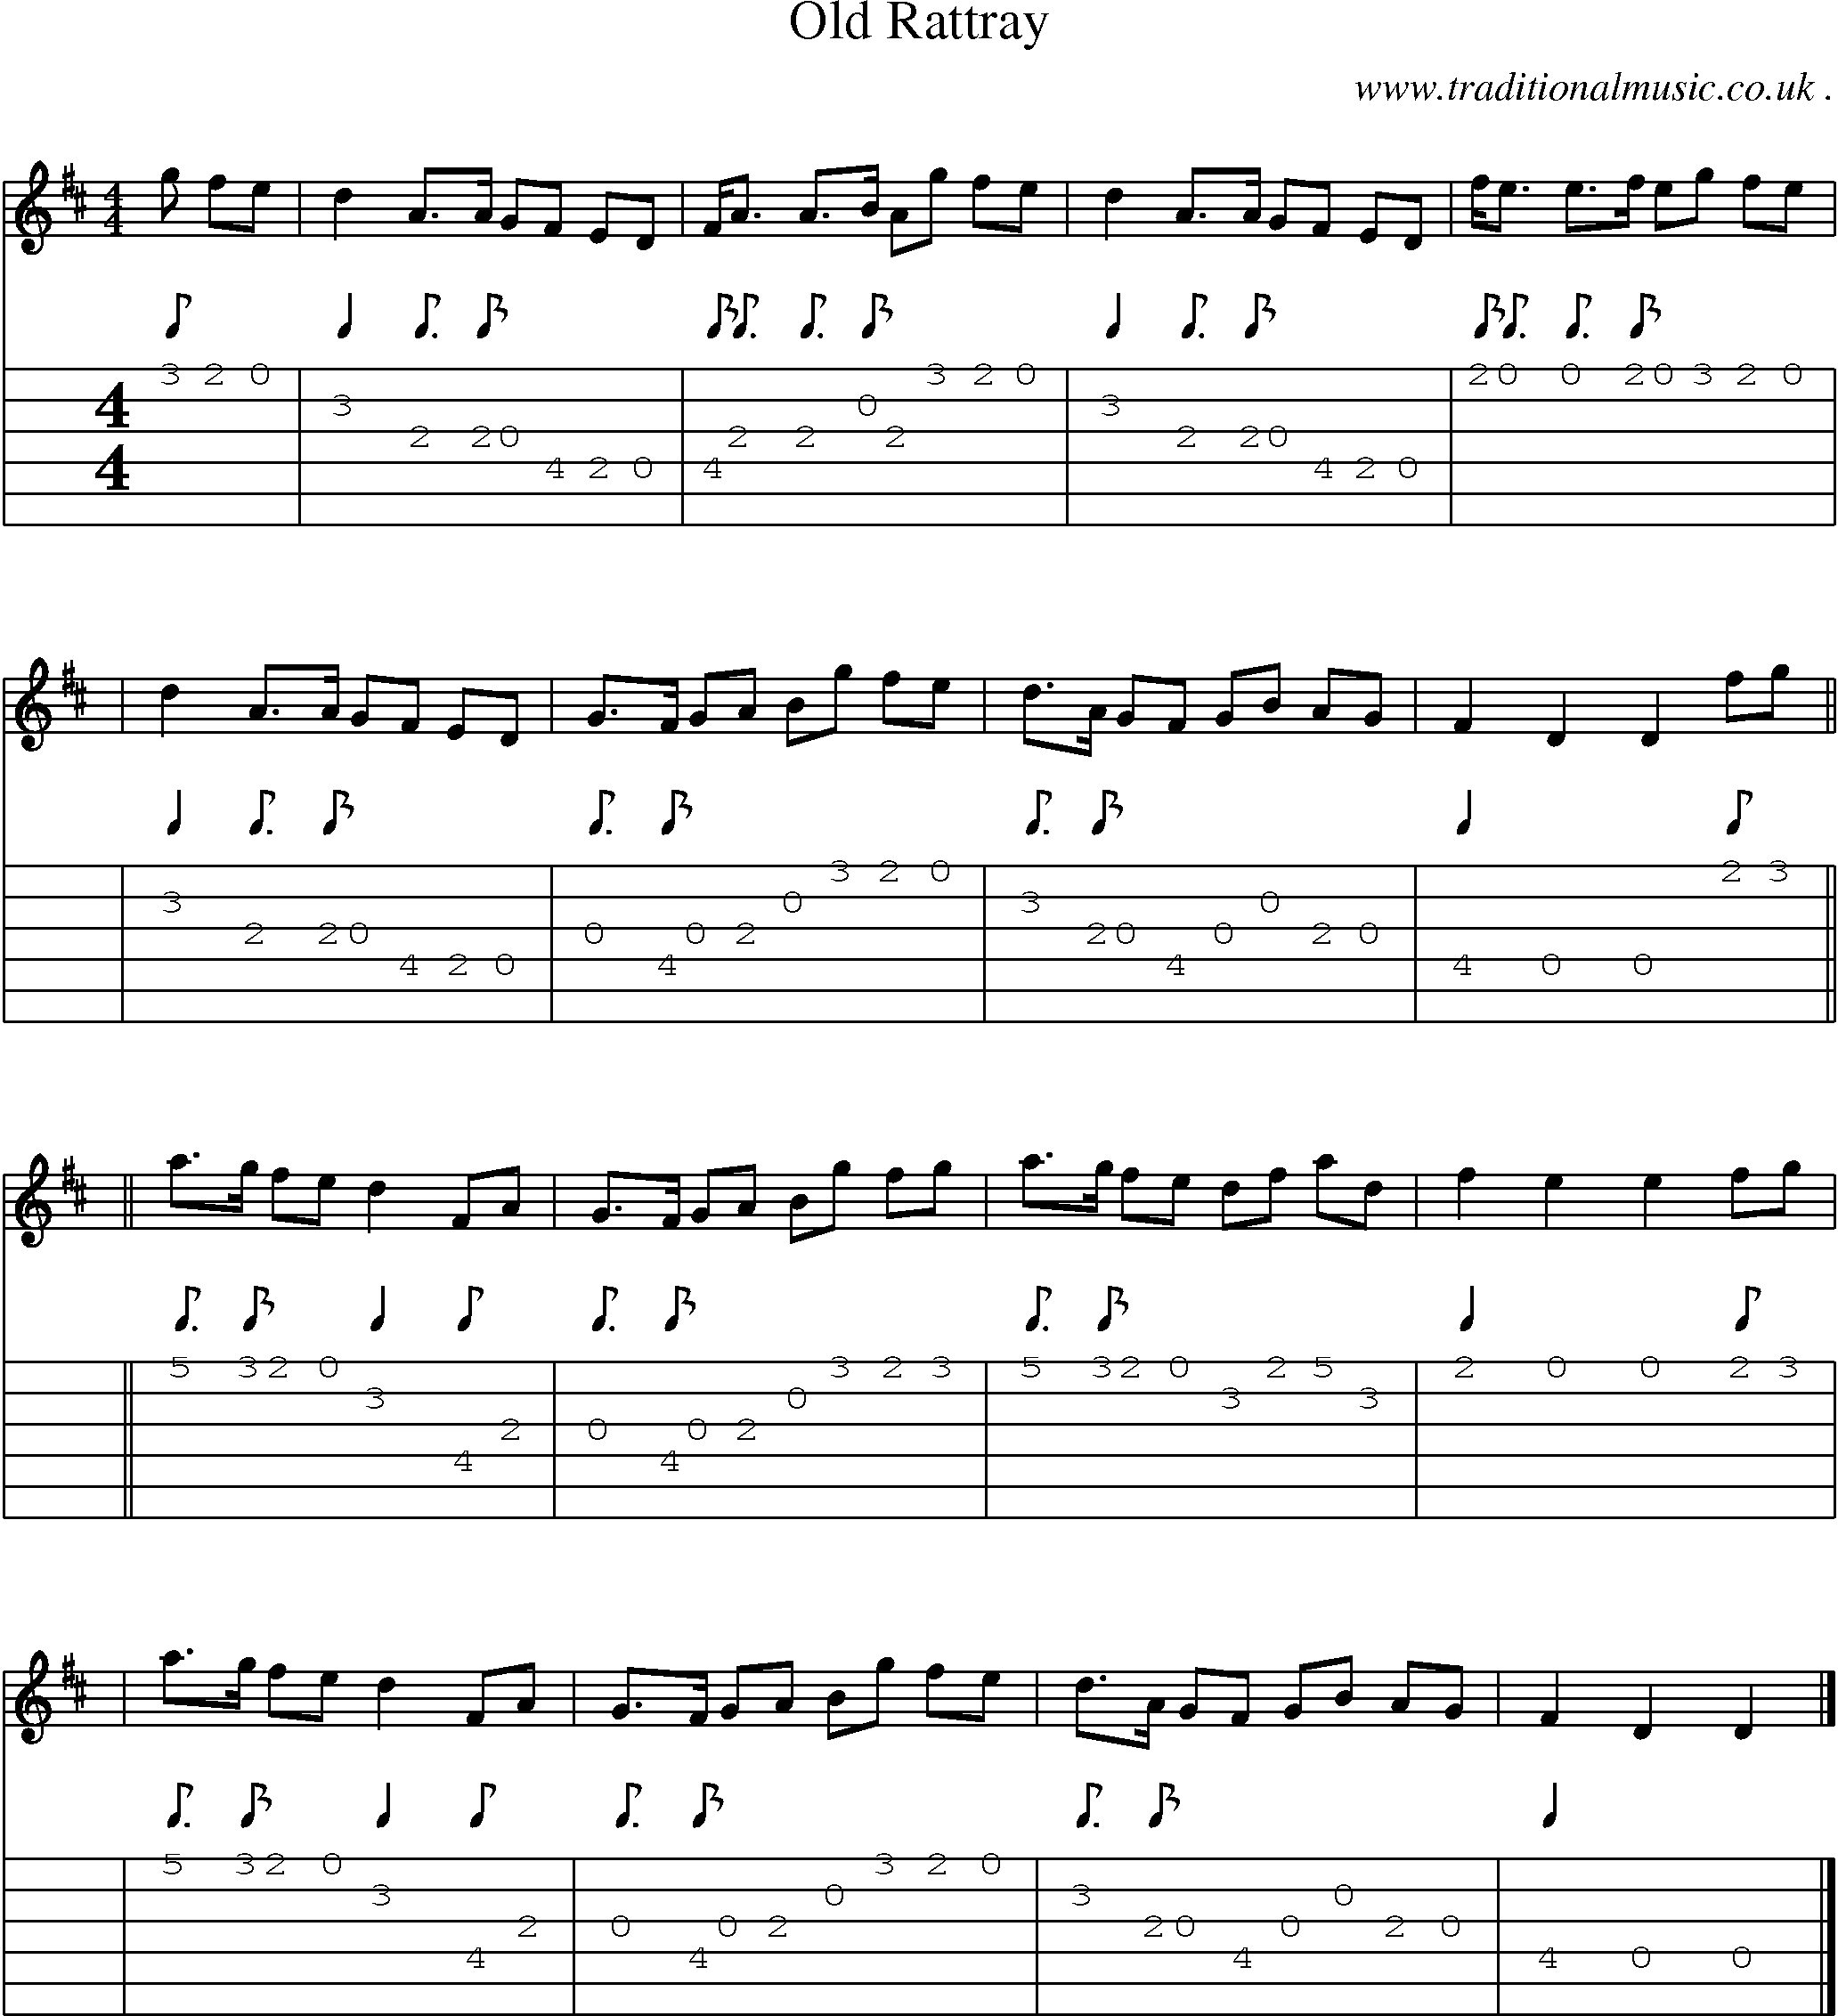 Sheet-music  score, Chords and Guitar Tabs for Old Rattray